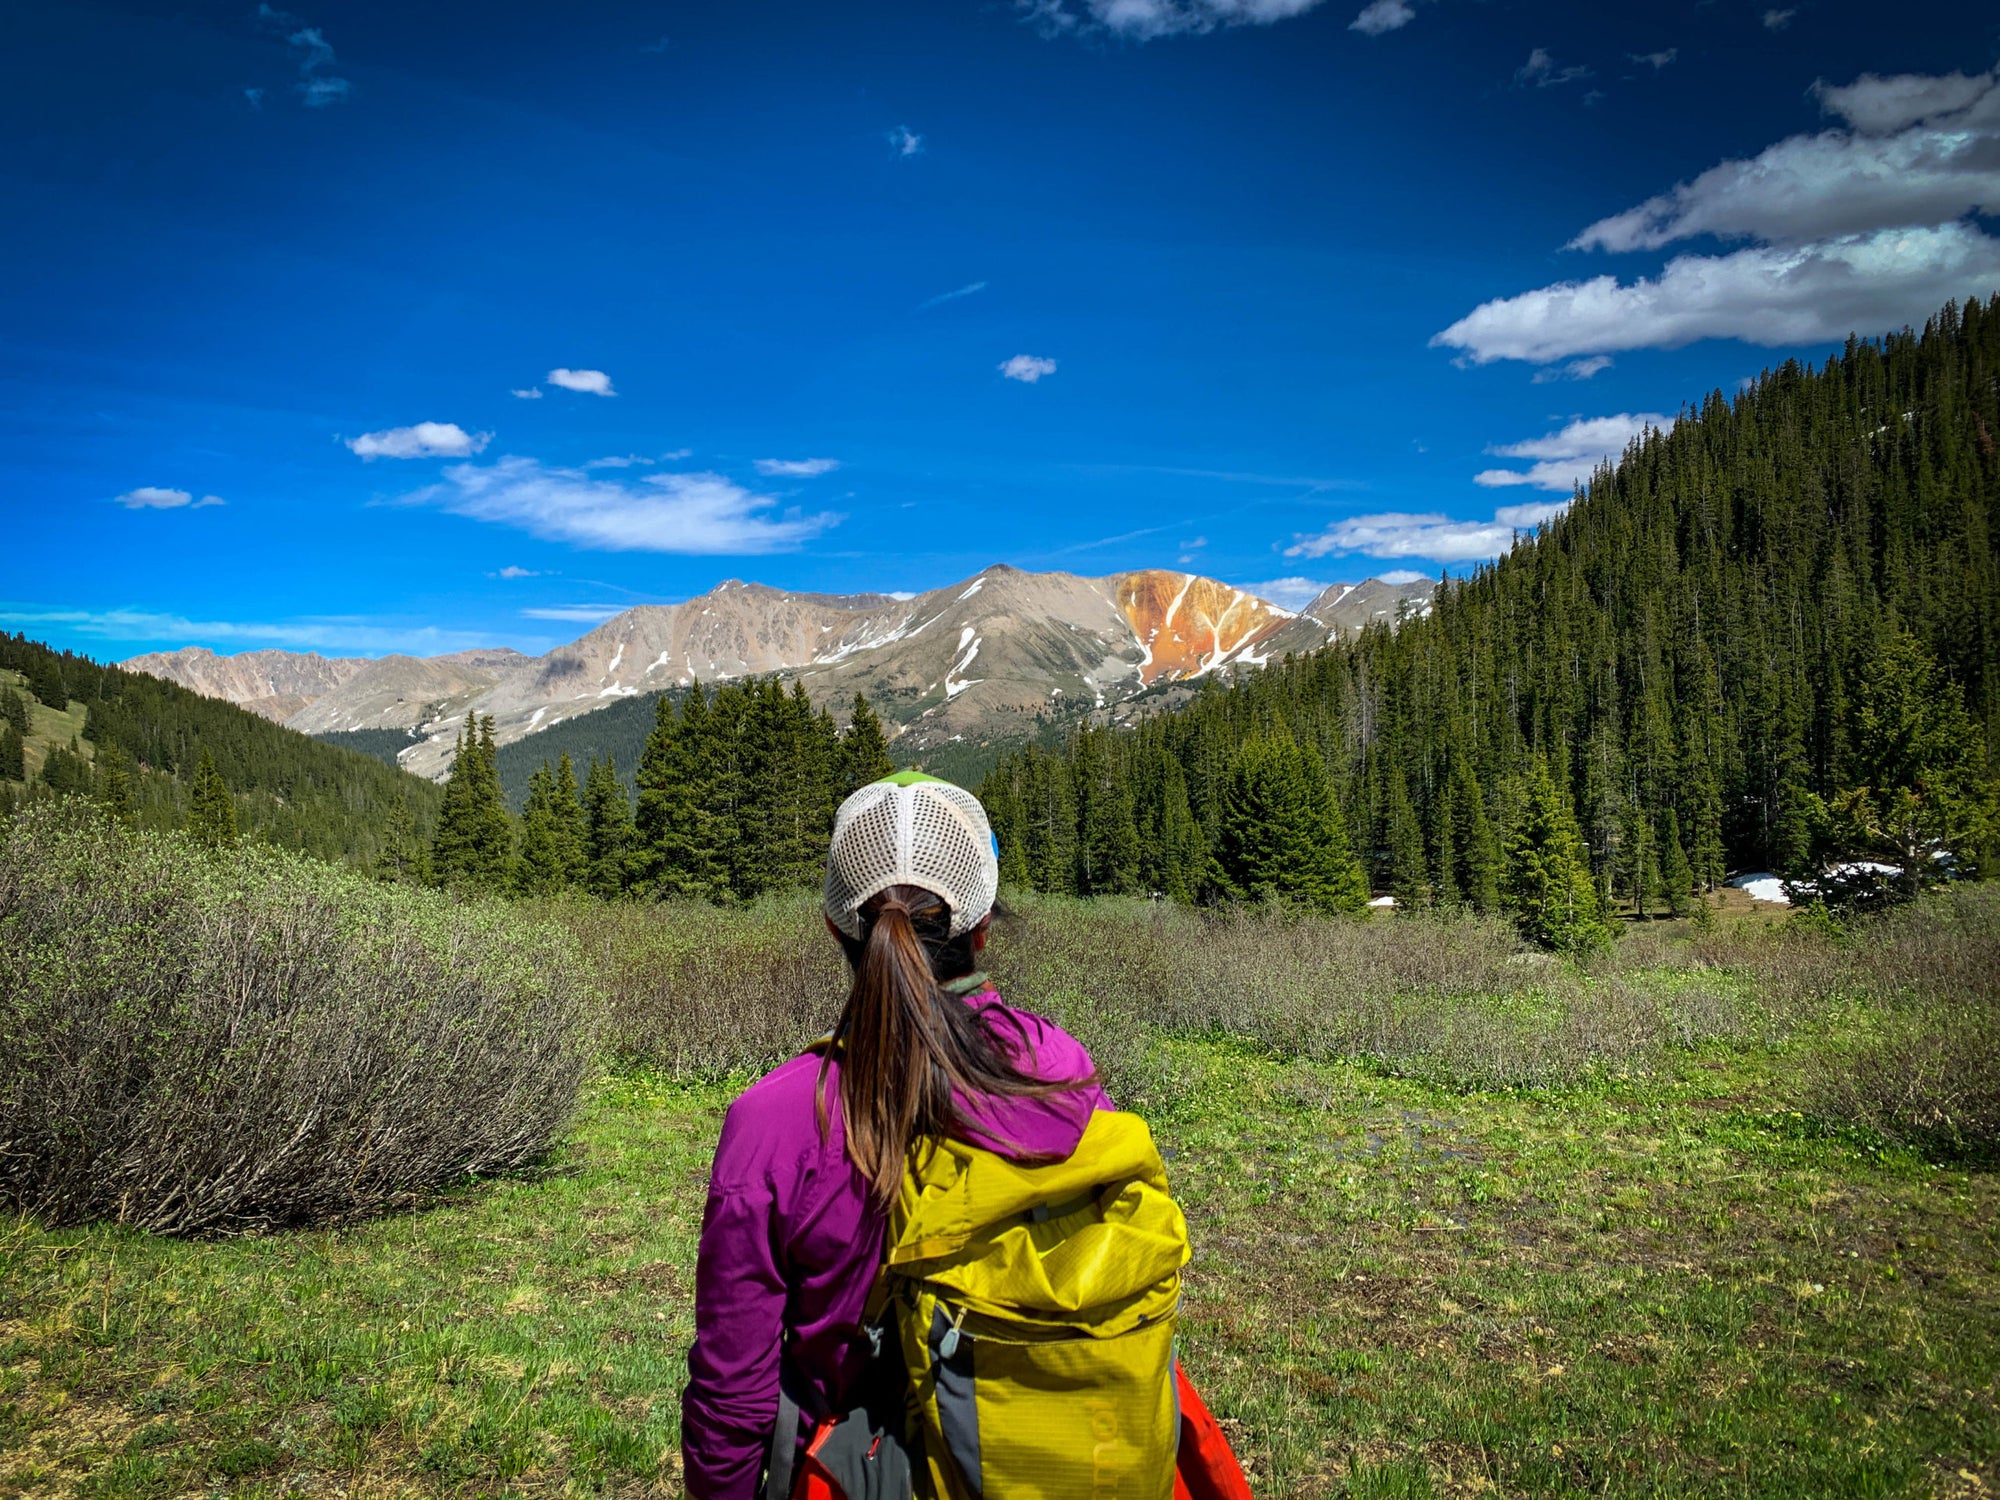 How to Hike on a Budget Without Disturbing Nature